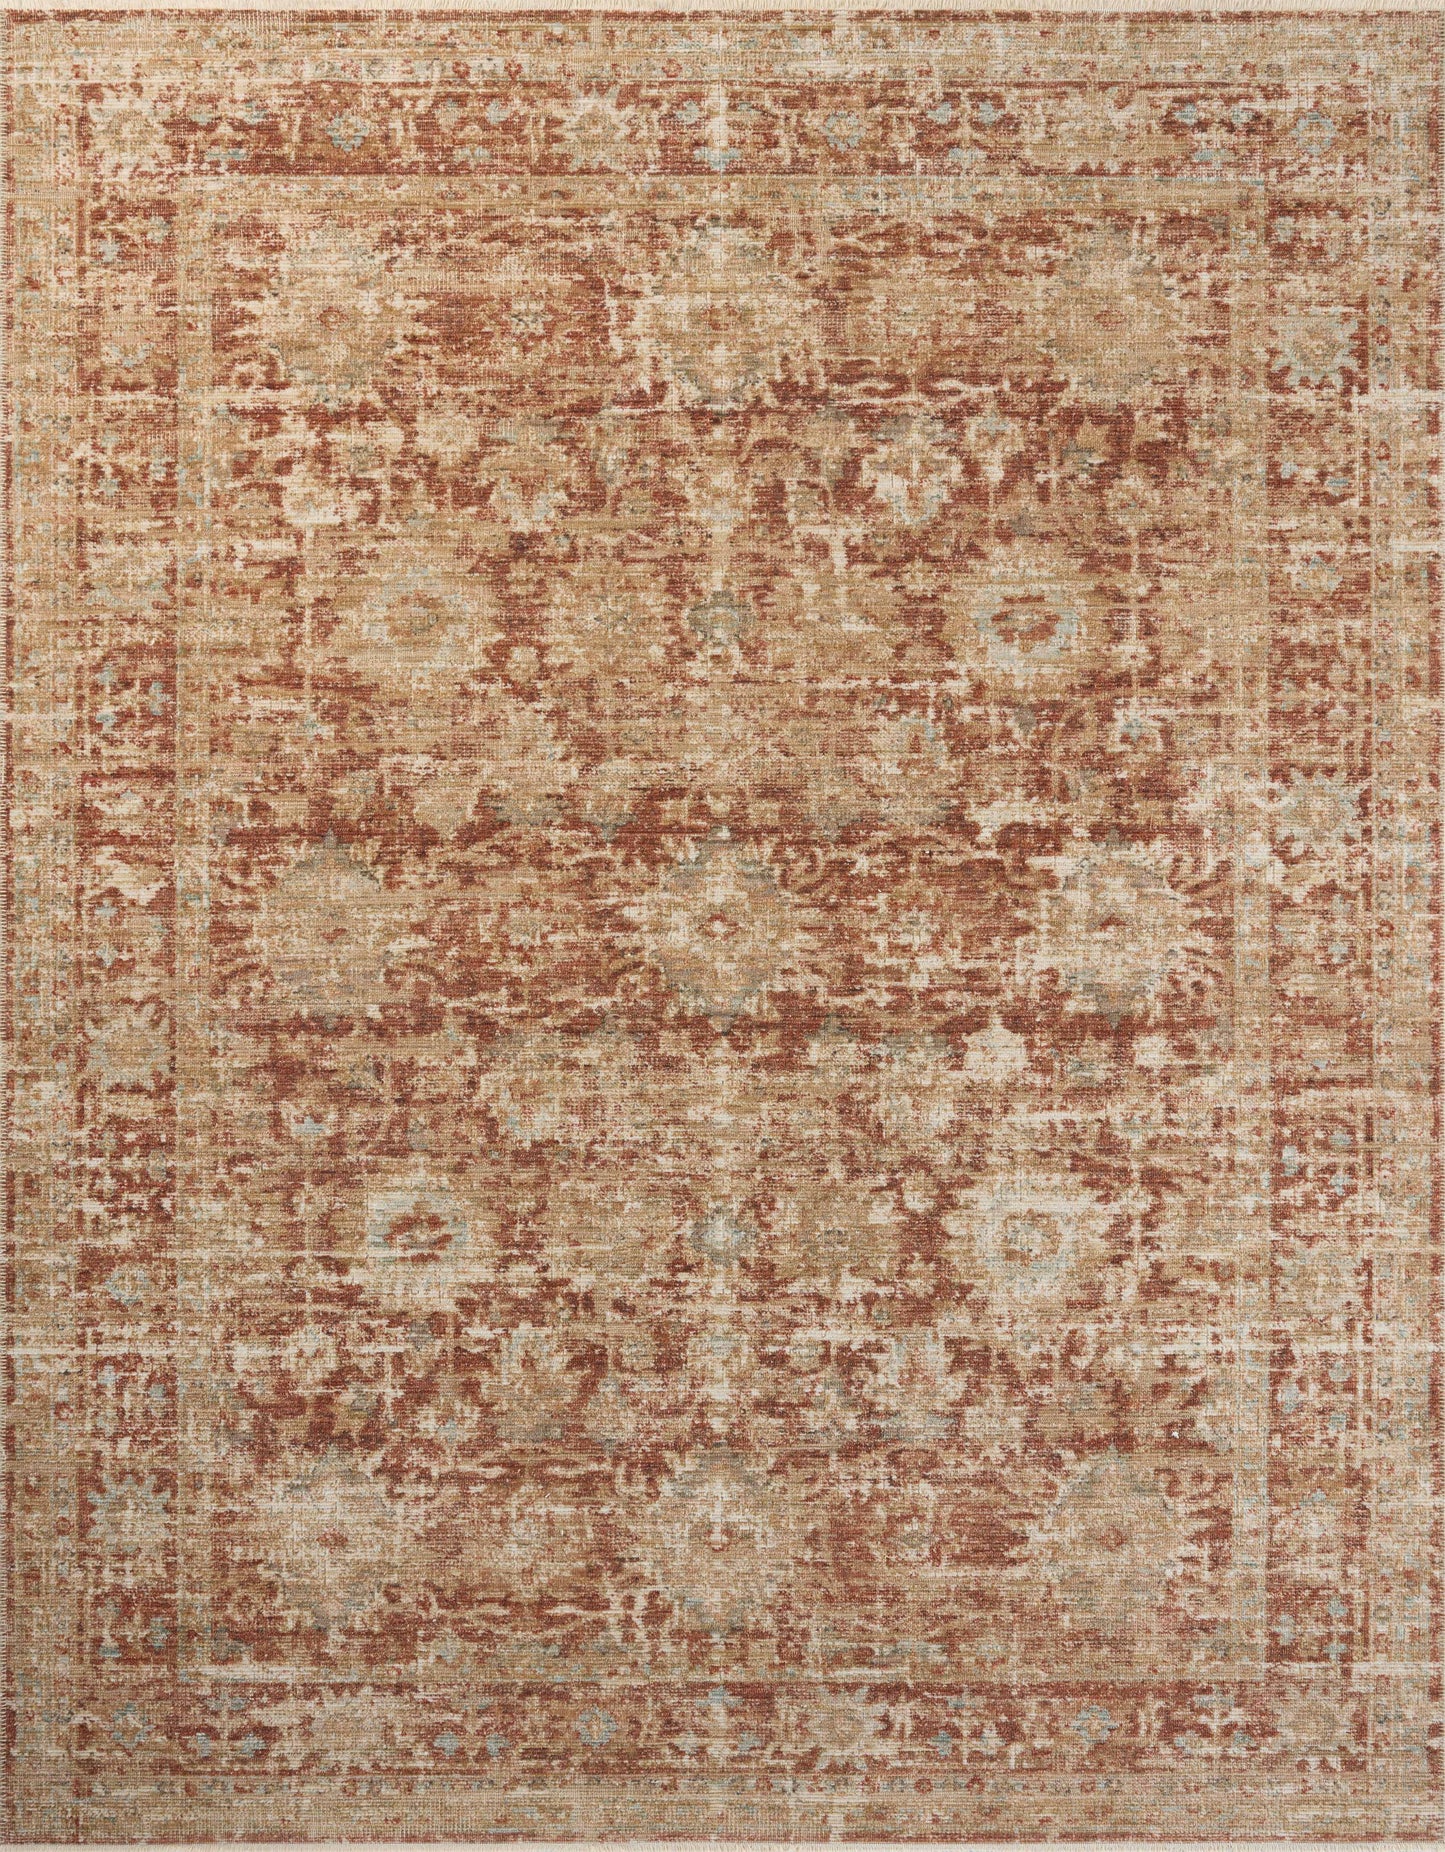 A picture of Loloi's Heritage rug, in style HER-03, color Brick / Multi